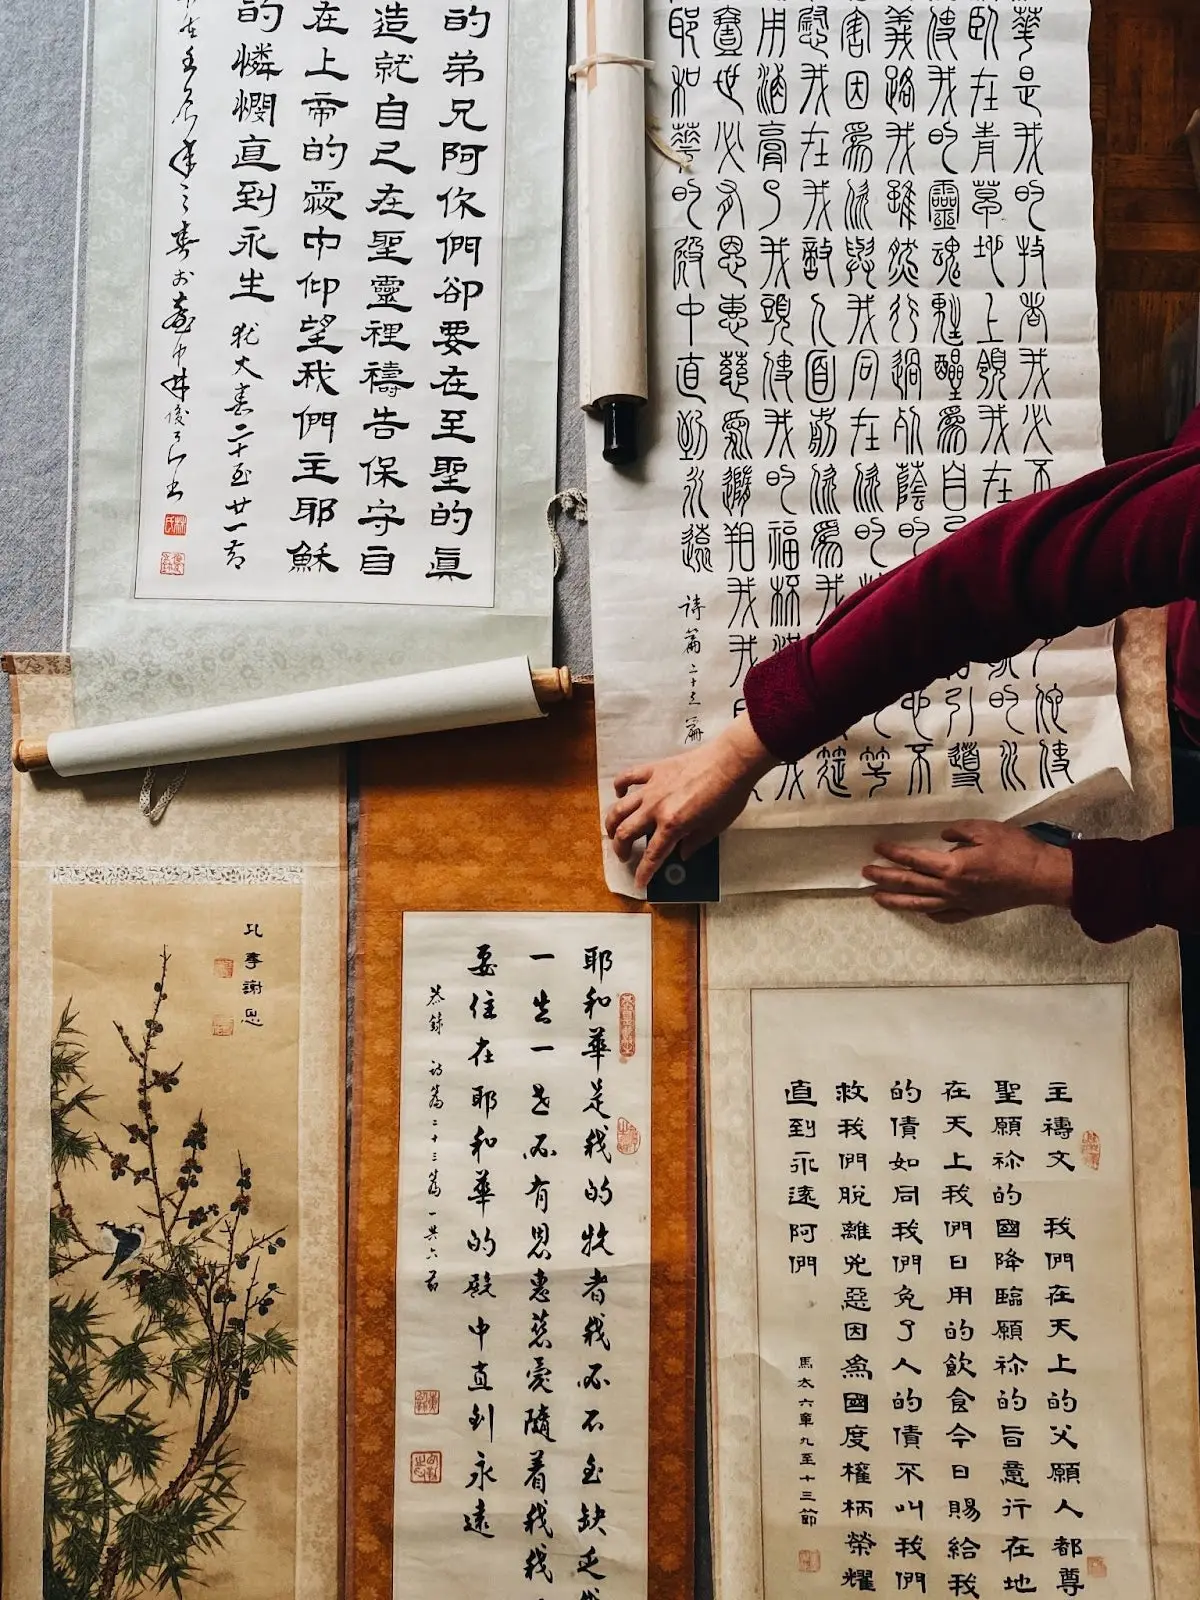 Image of rolls of paper with Chinese characters drawn on them. 